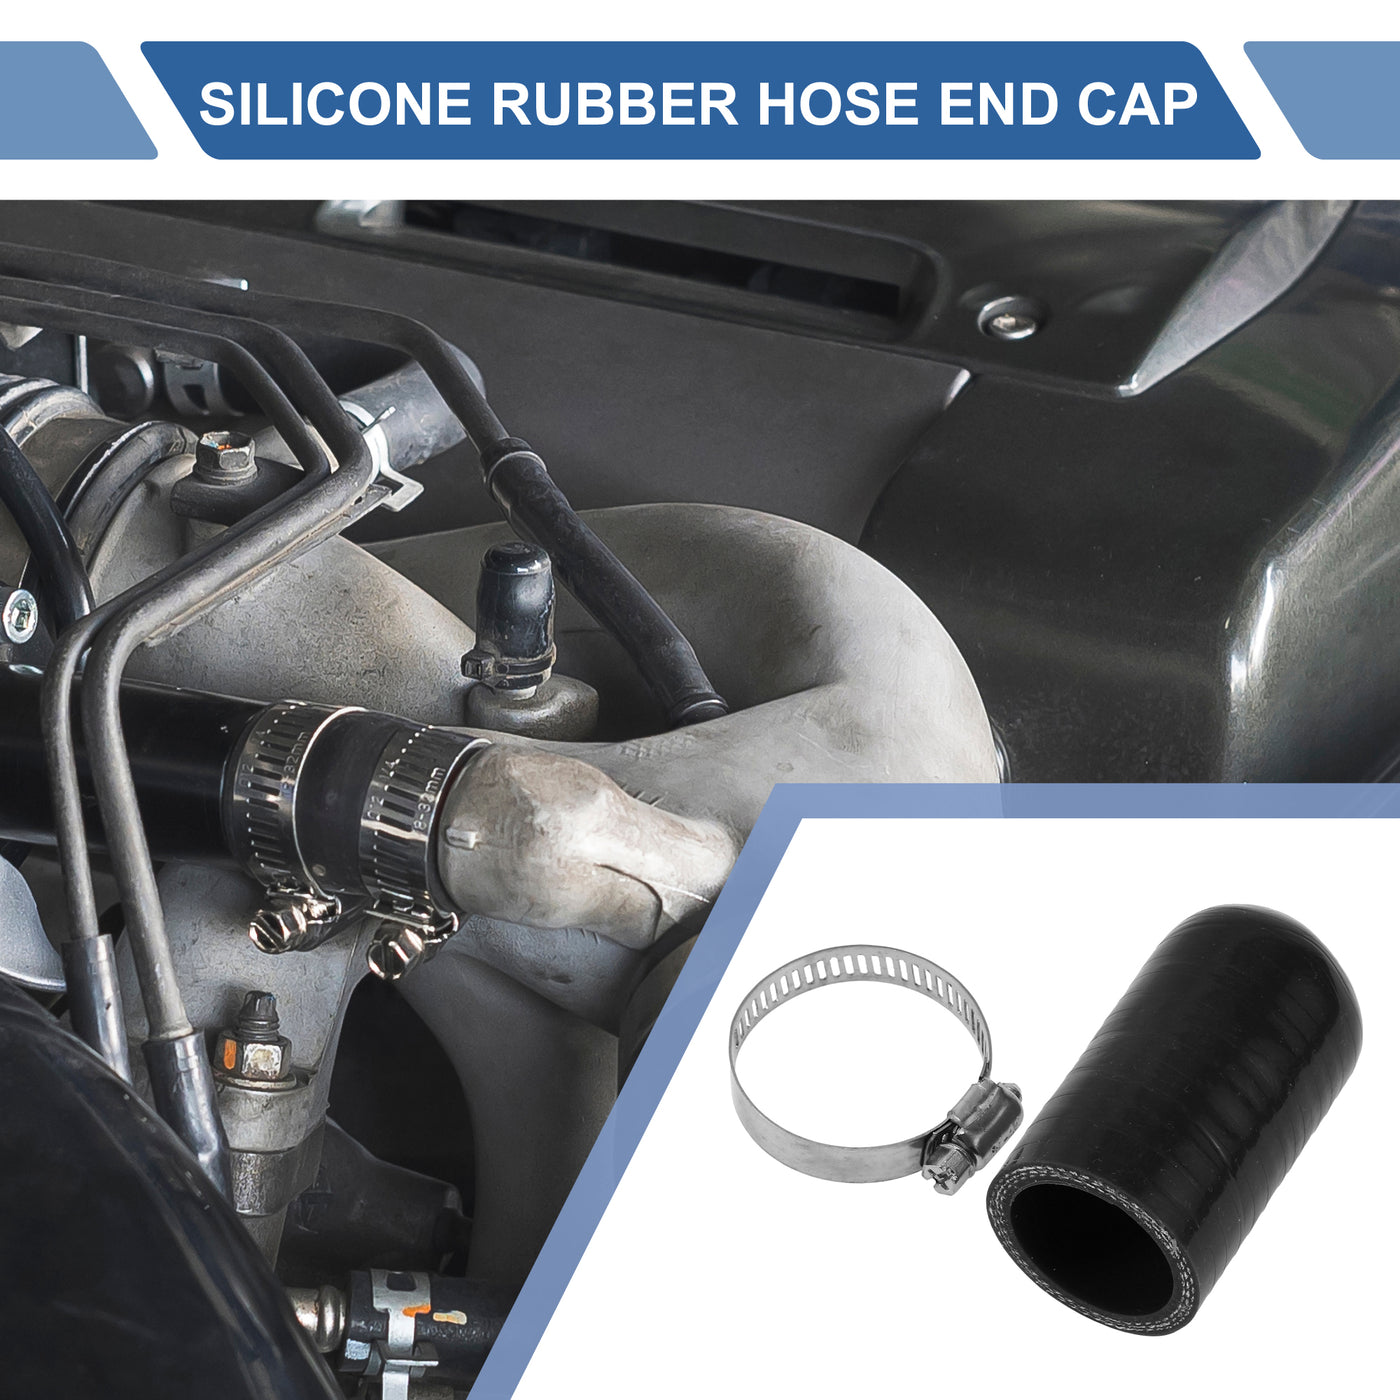 X AUTOHAUX 1 Pcs 60mm Length 32mm/1.26" ID Black Car Silicone Rubber Hose End Cap with Clamp Silicone Reinforced Blanking Cap for Bypass Tube Universal